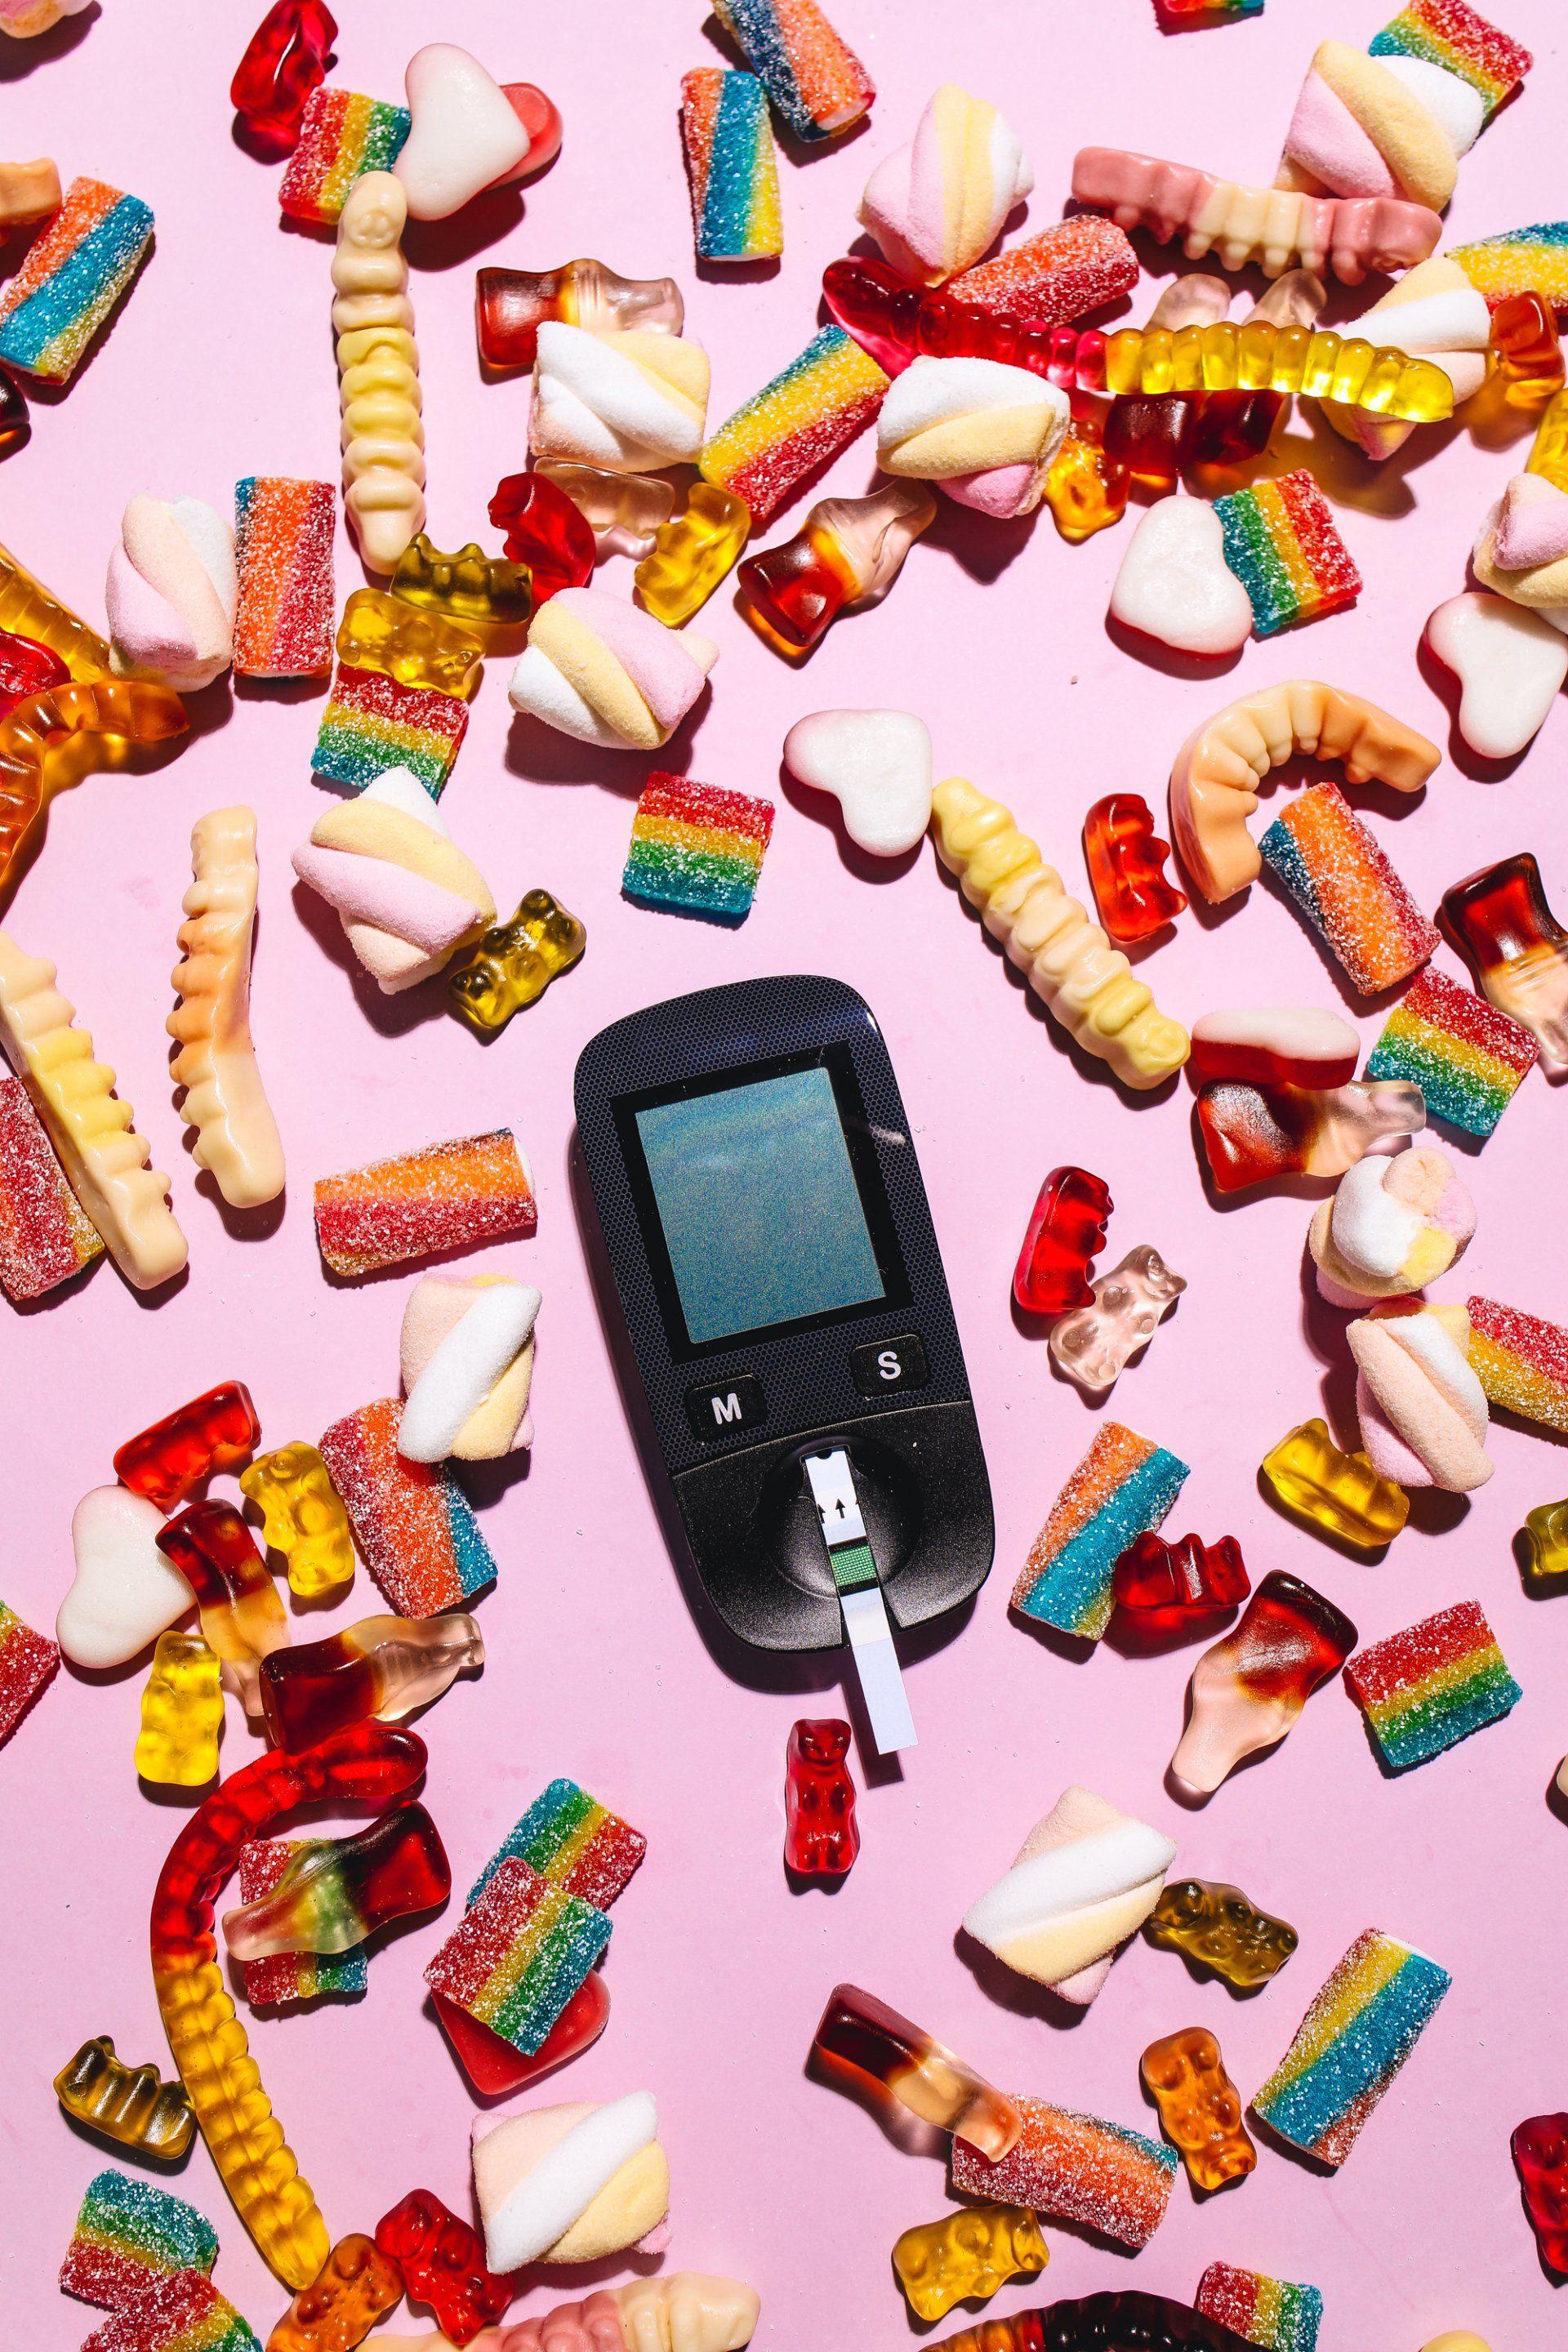 A diabetes monitor is surrounded by candy on a pink background.